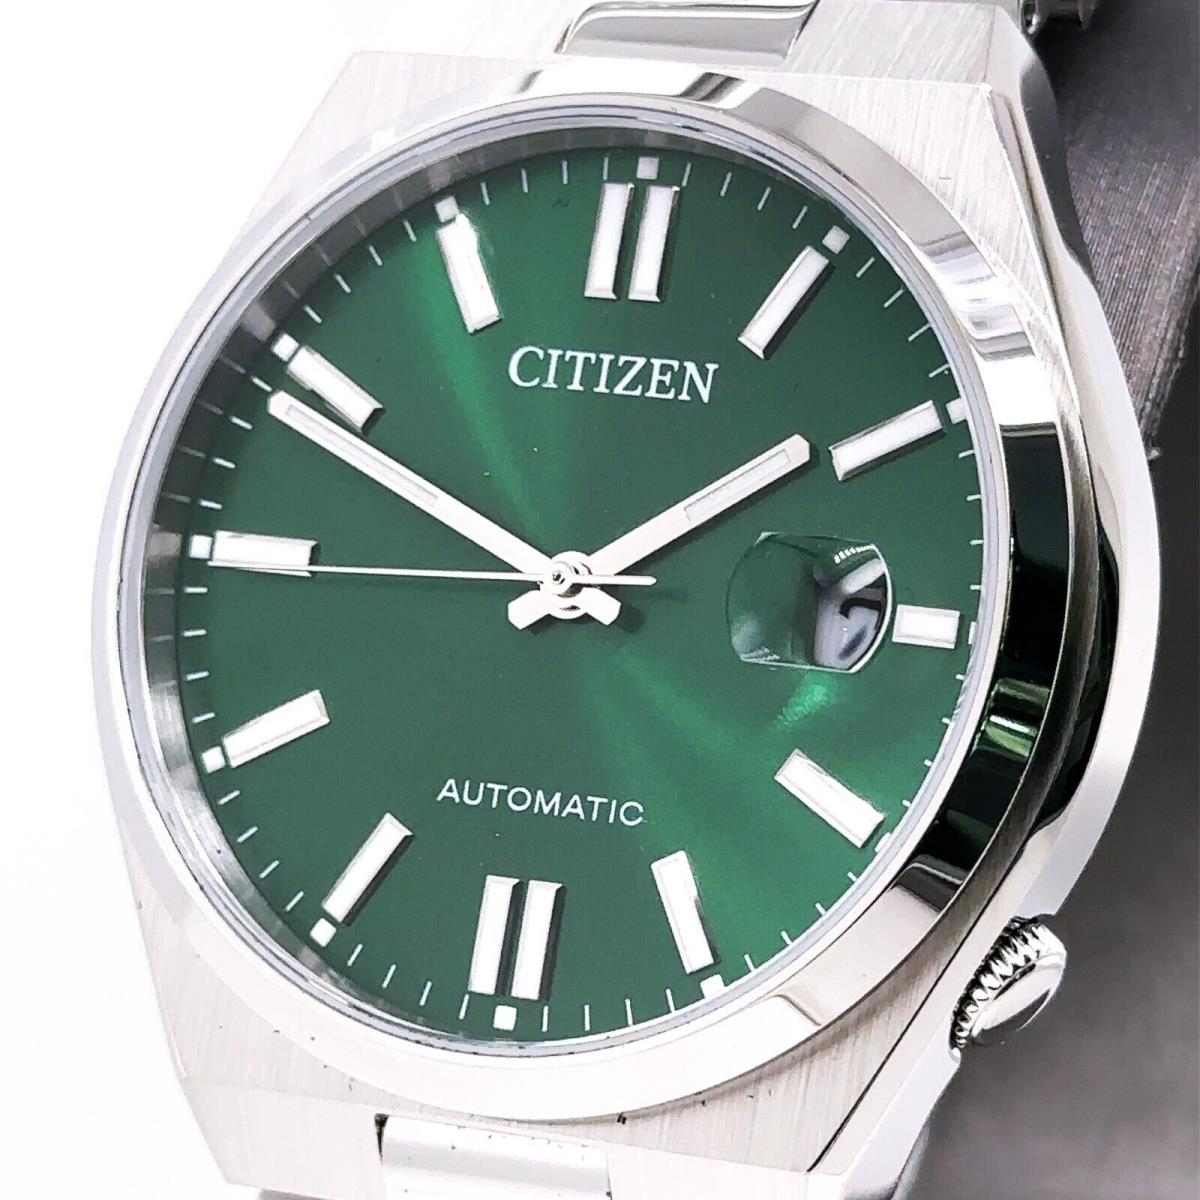 Citizen Tsuyosa Automatic Stainless Steel Green Dial 40mm Watch NJ0150-56X - Dial: Green, Band: Silver, Bezel: Silver